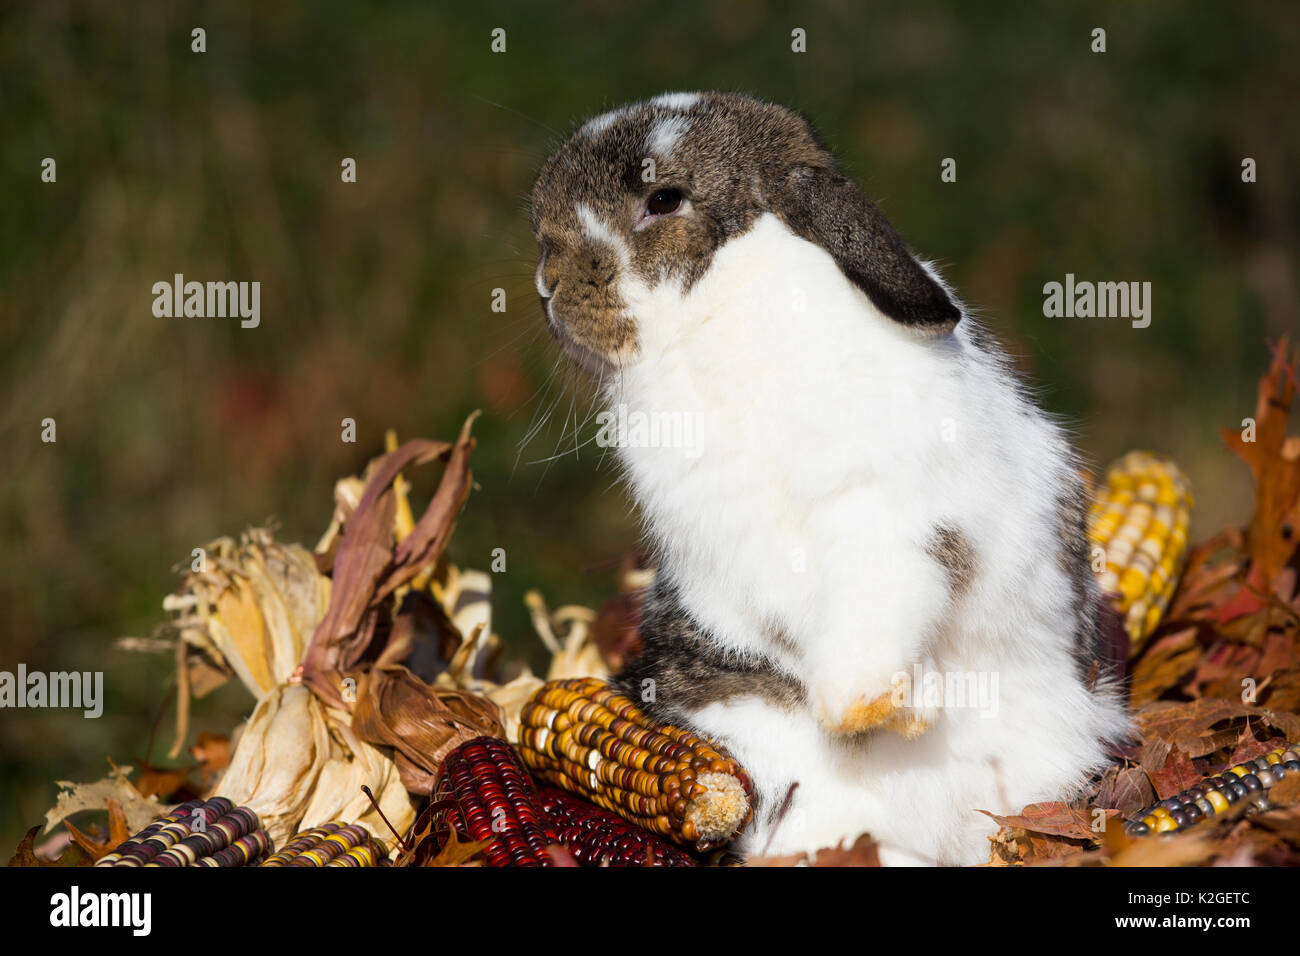 Holland Lop rabbit sitting up among oak leaves and Indian corn, Newington, Connecticut, USA Stock Photo